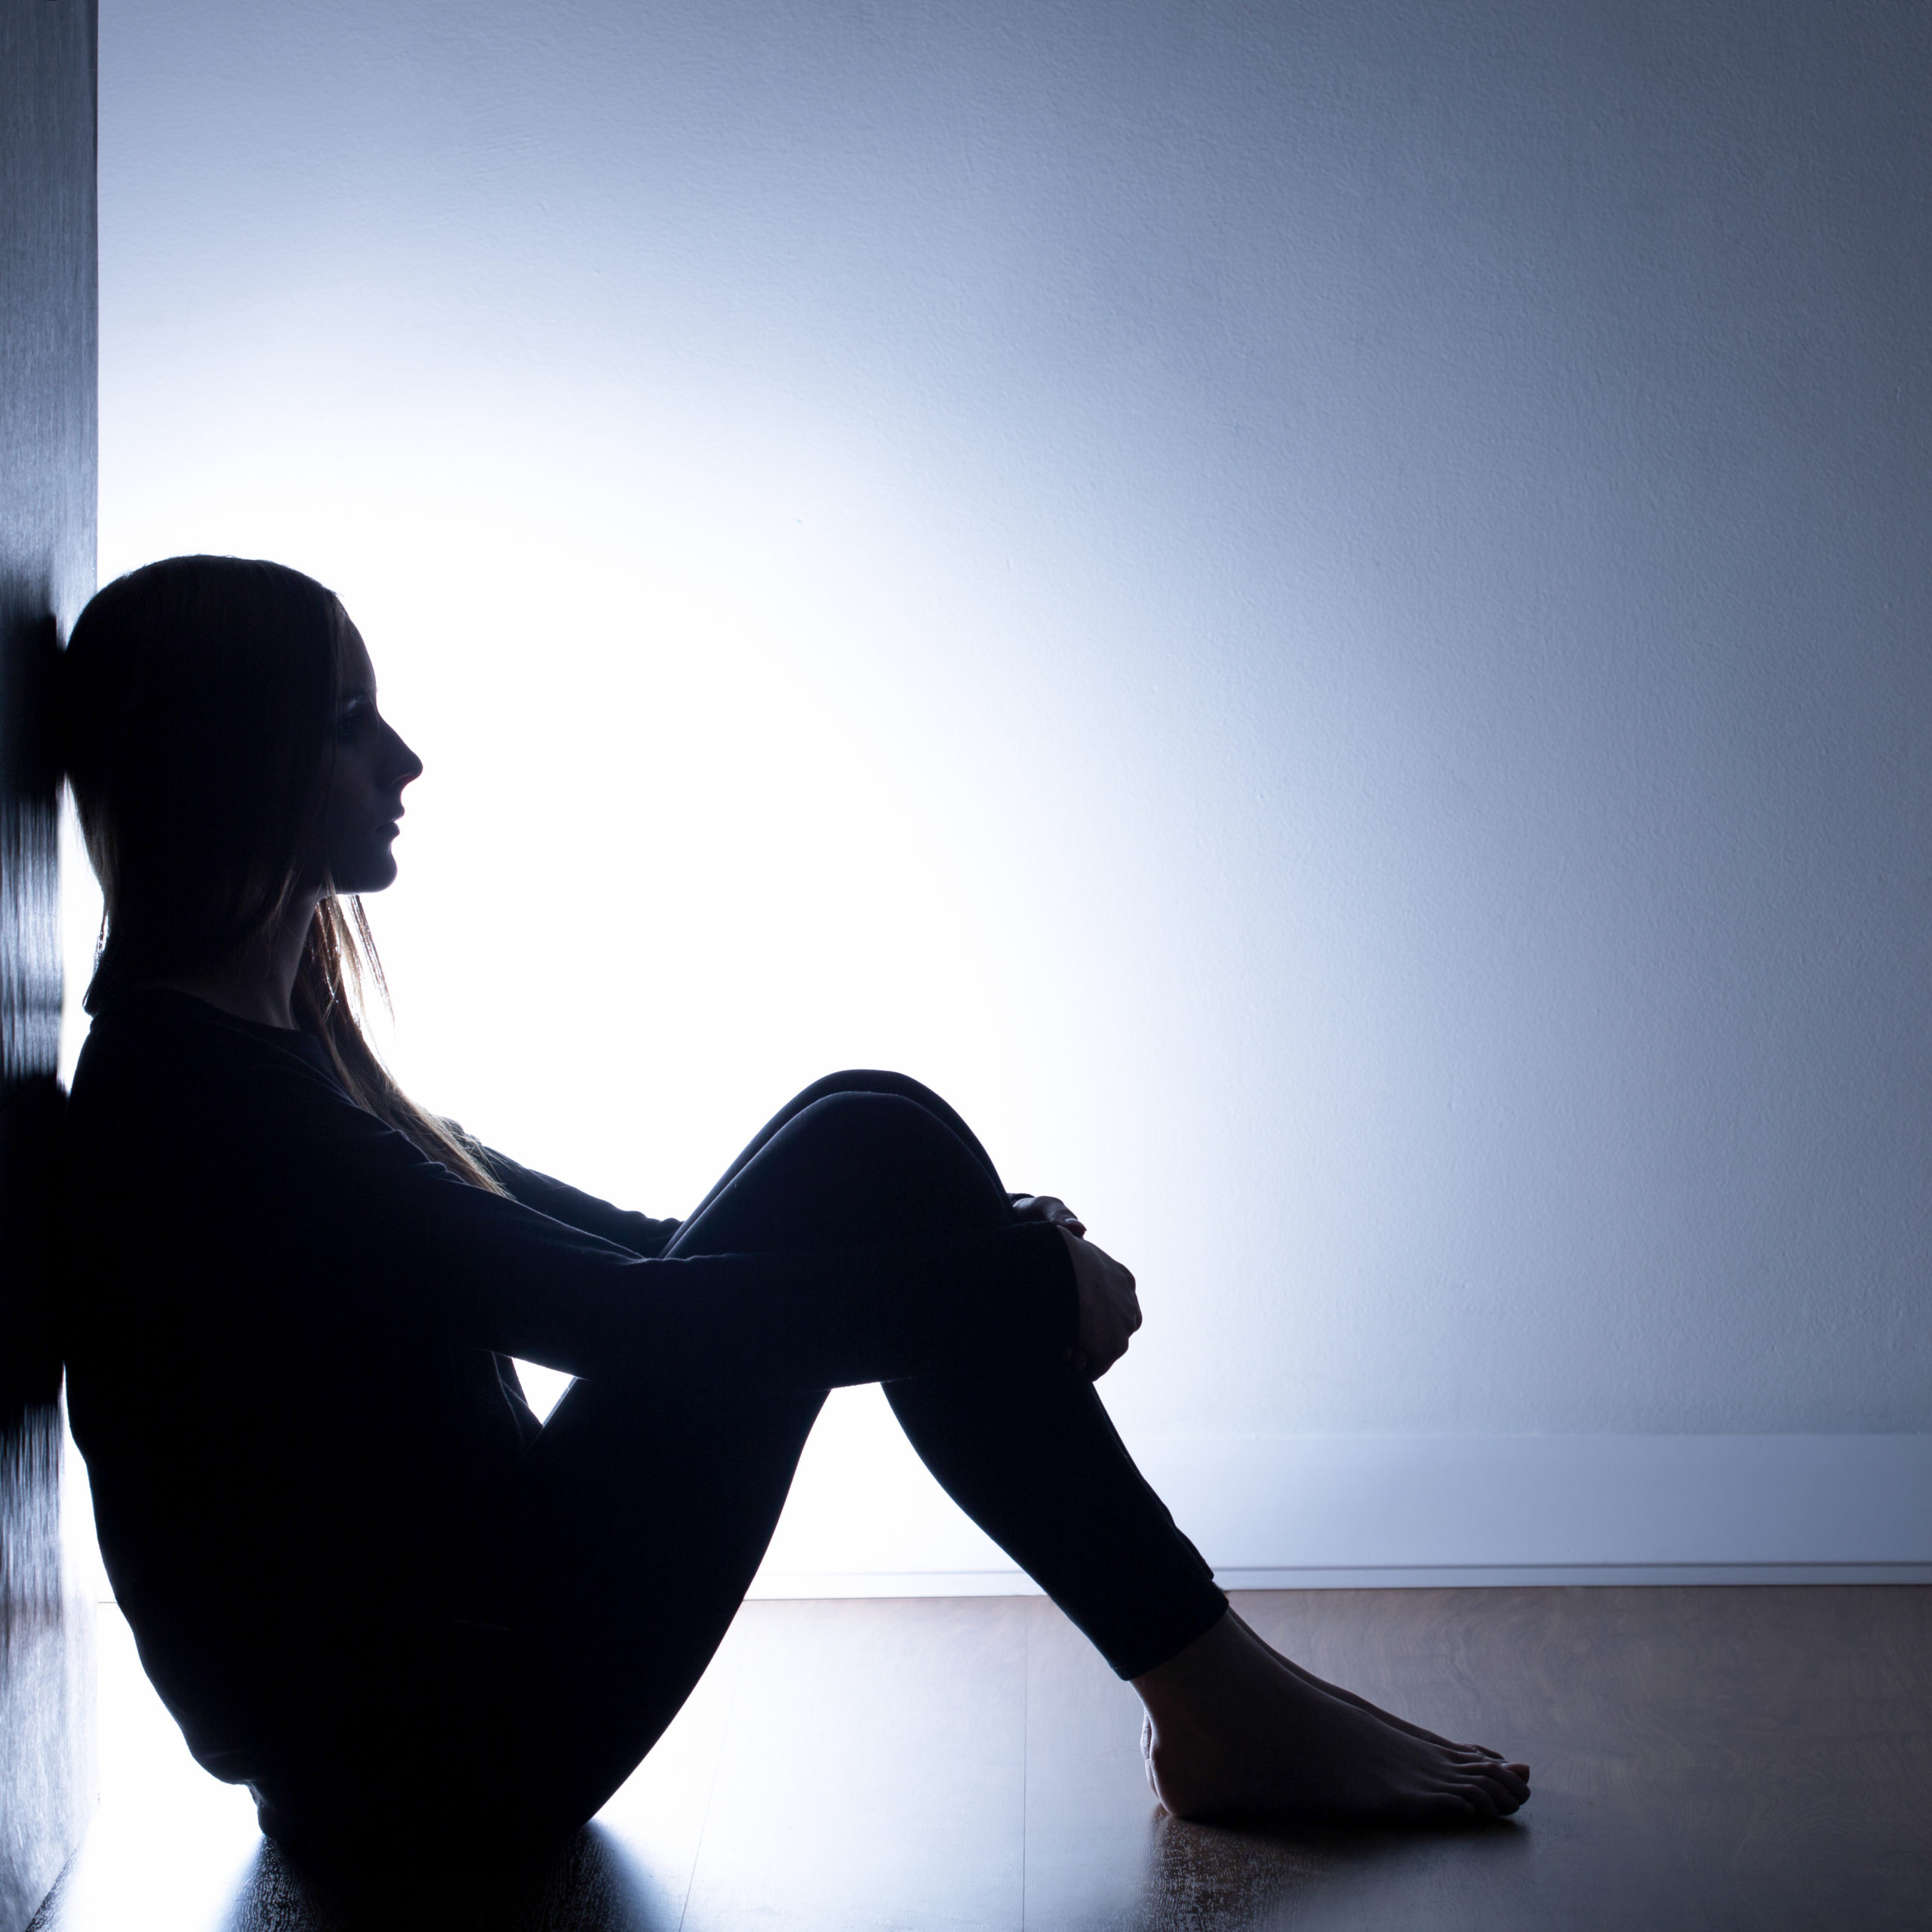 A teenage girl is shown in silhouette, sitting alone in dark room.